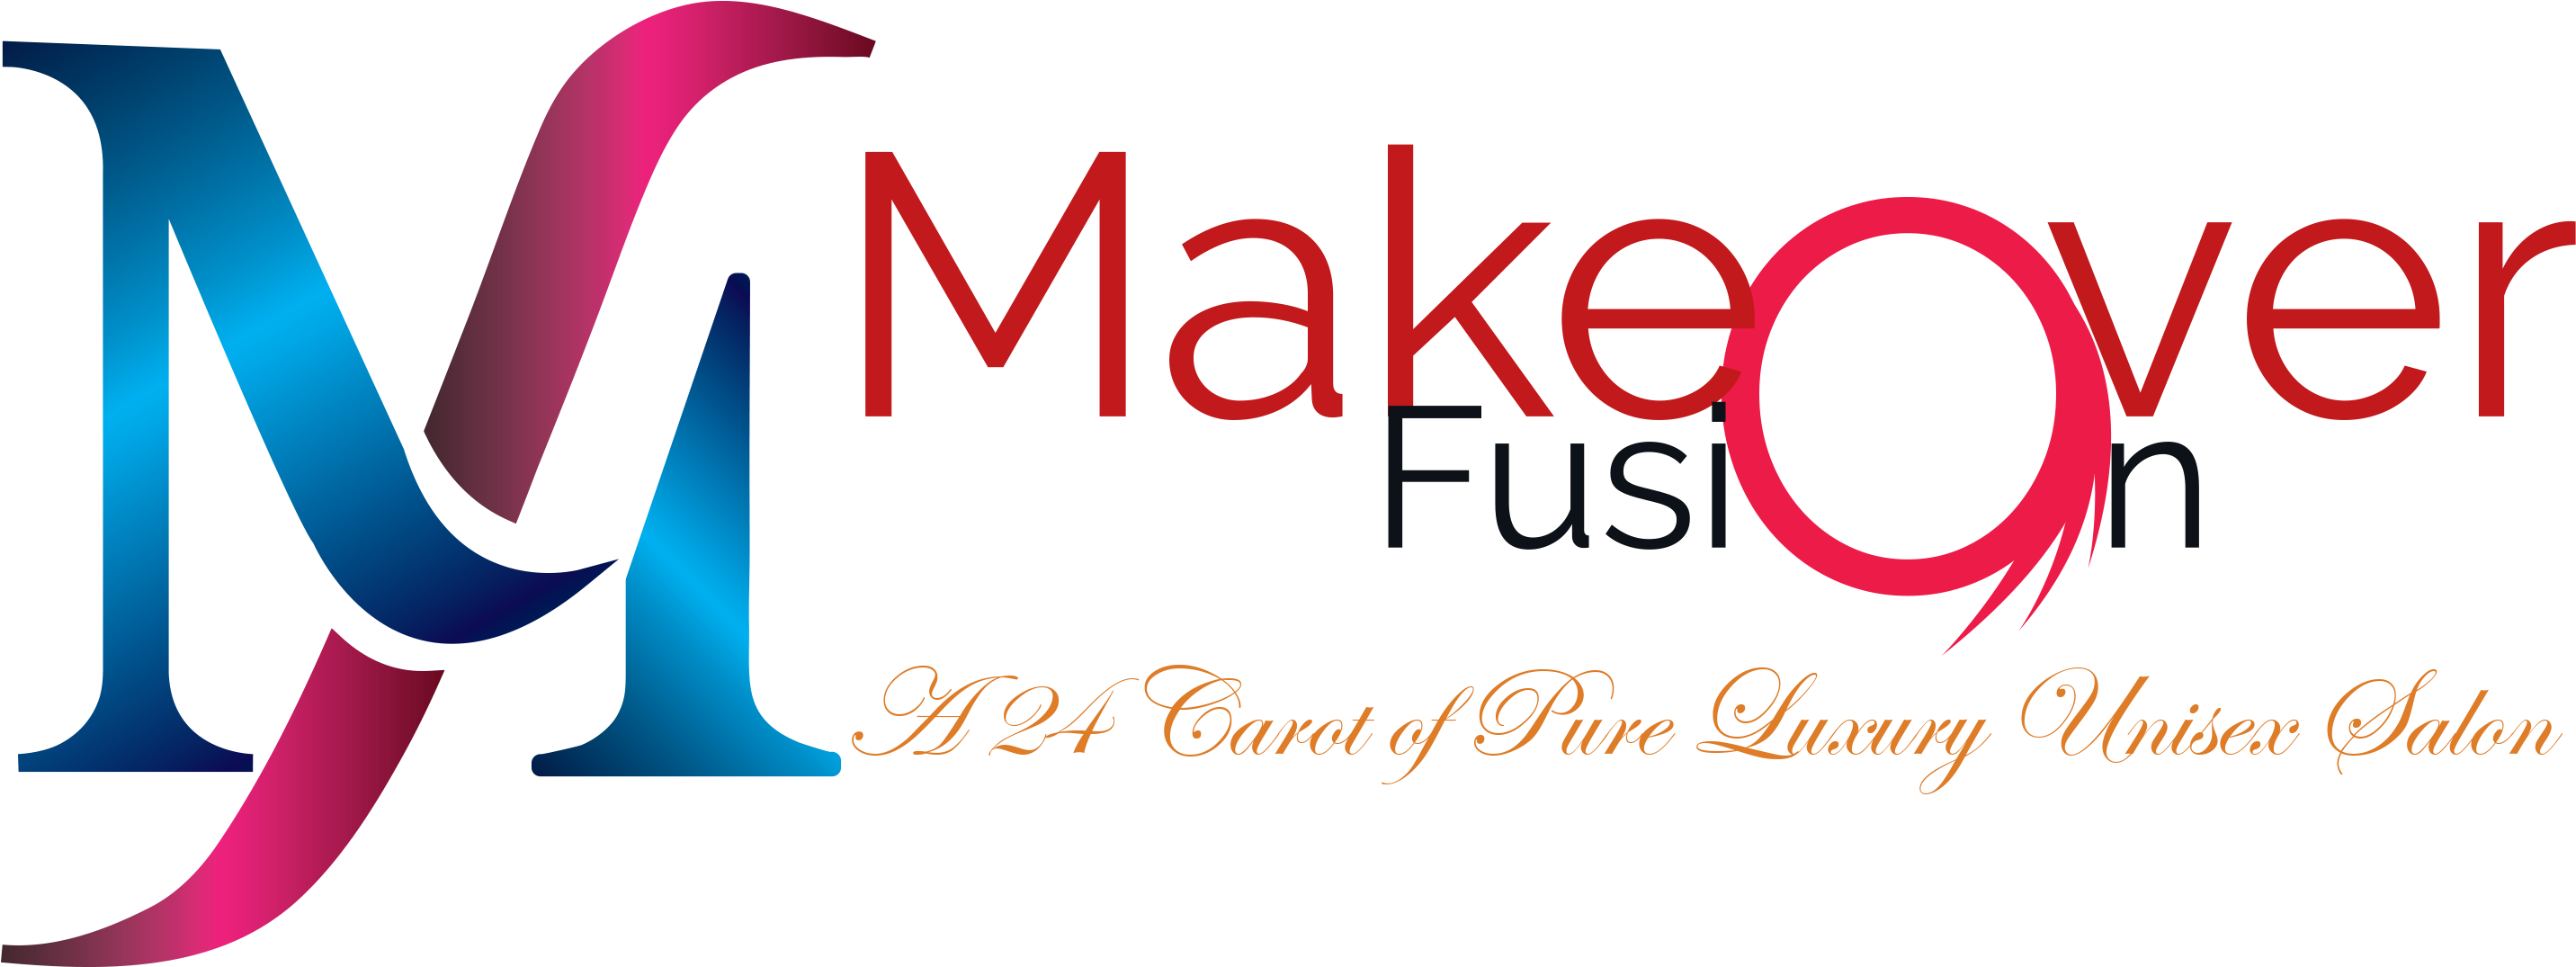 Makeover Fusion Is An Upscale Salon, 24 Carot Of Pure - Makeover Fusion (3062x1074)